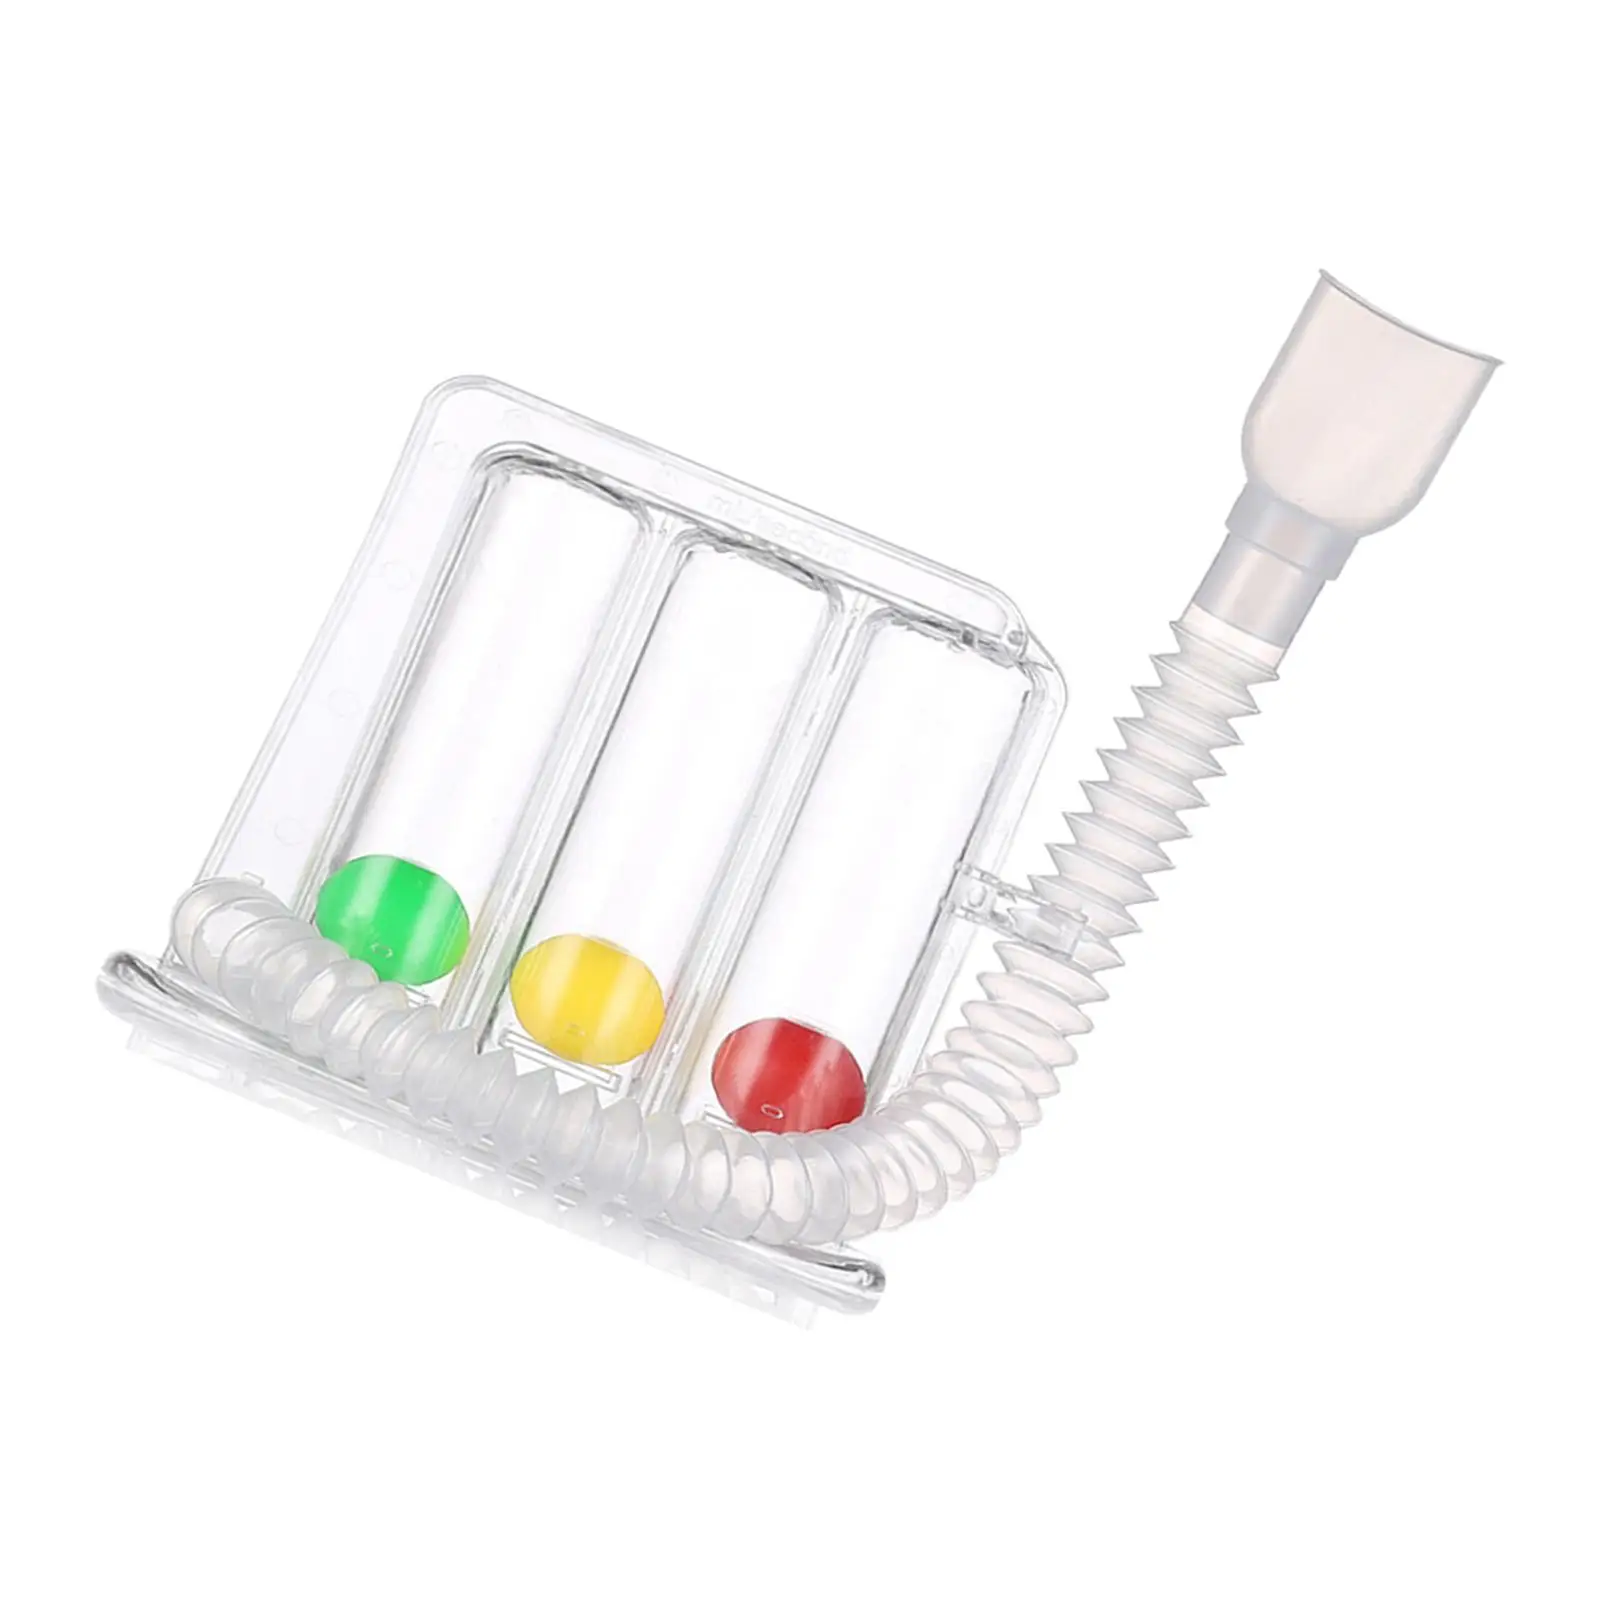 Deep Breathing Exerciser Incentive Spirometer Breathing Exercise Lung Function